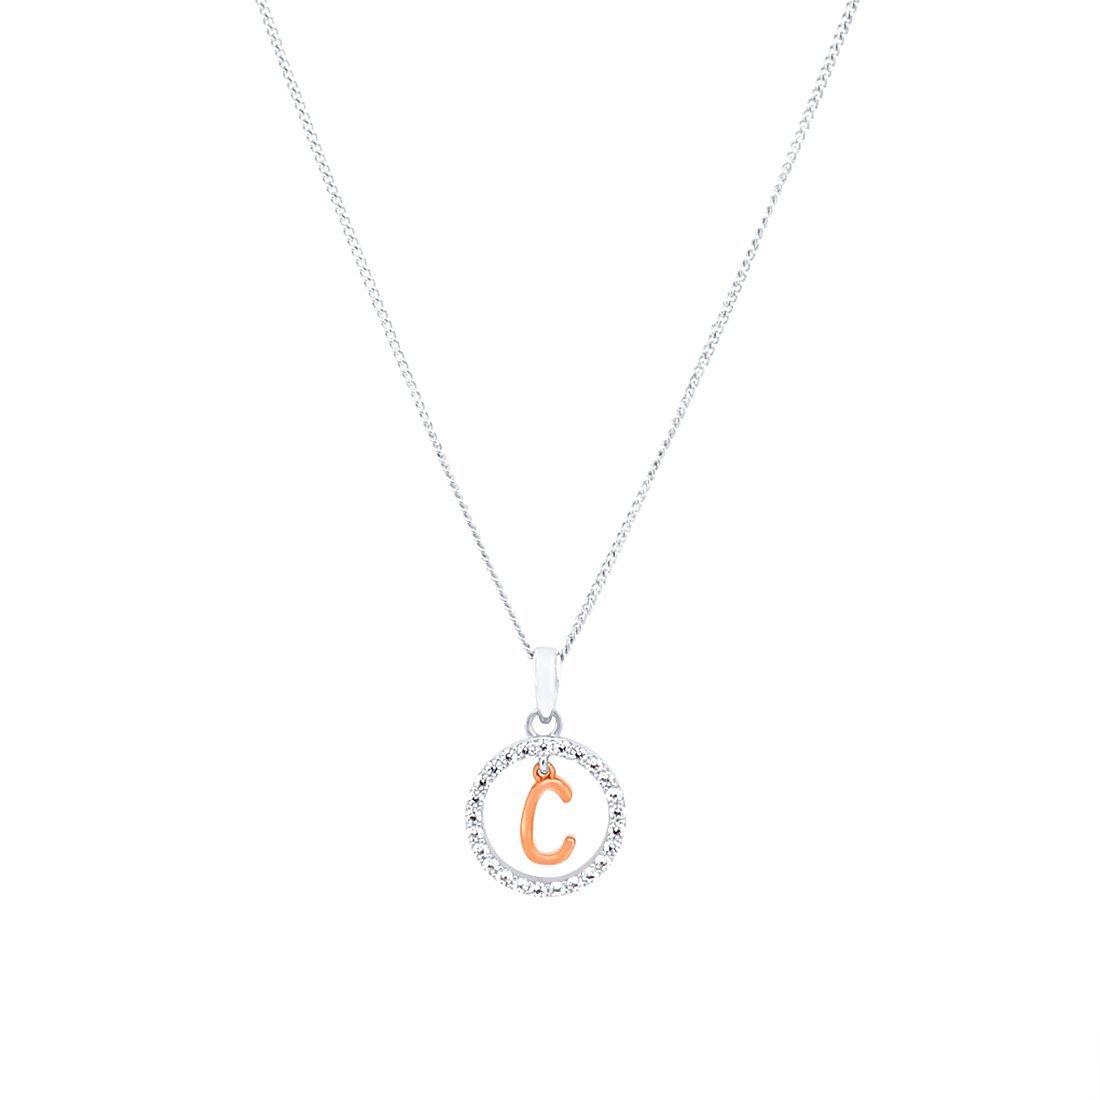 Sterling Silver & Rose Plated Initial Necklace with Cubic Zirconias Necklaces Bevilles C 